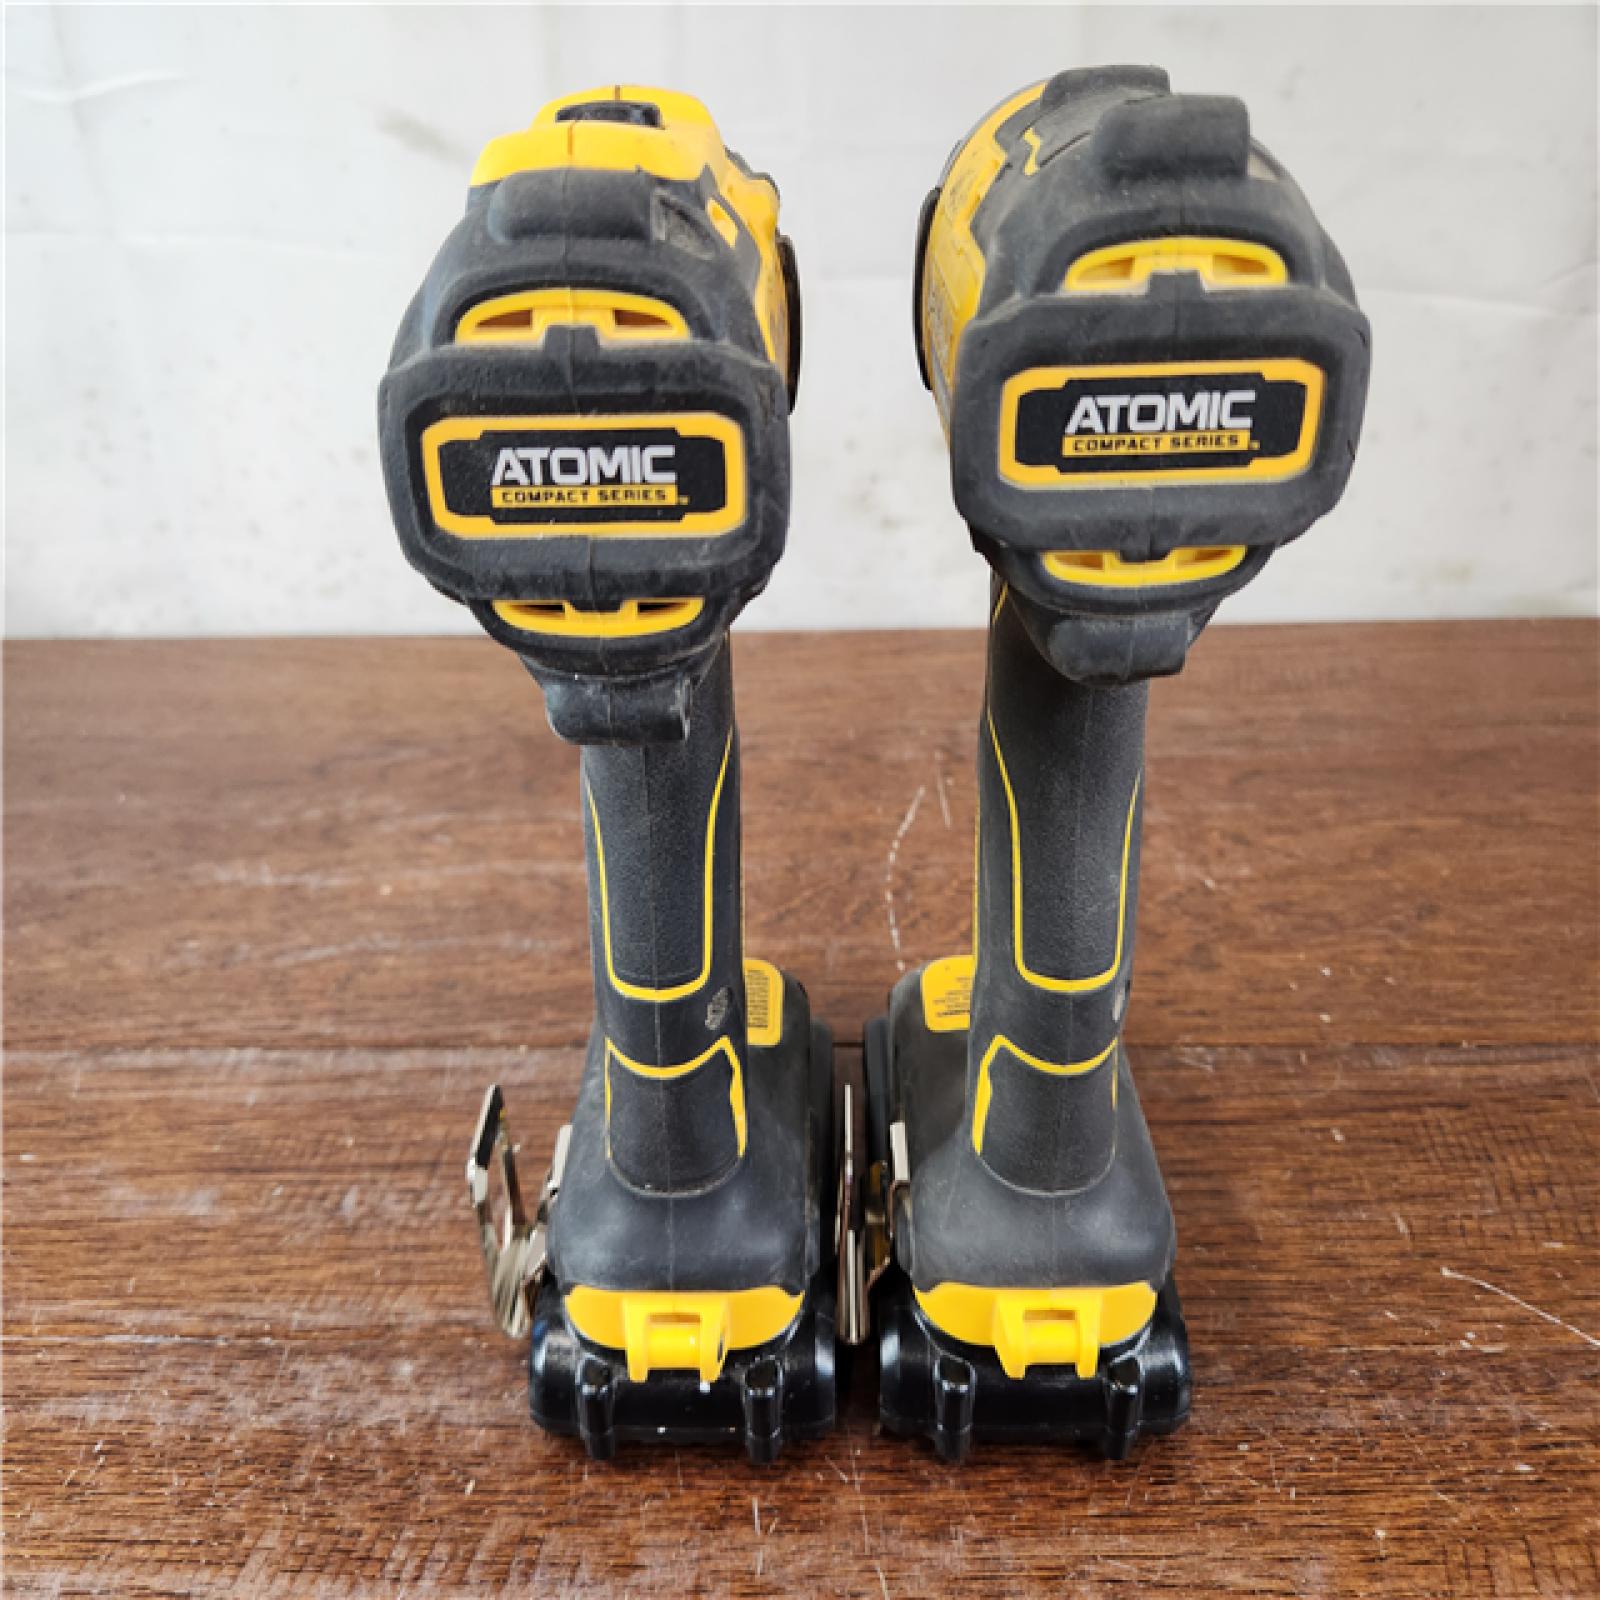 AS-IS DEWALT 20V MAX Brushless Cordless Drill/Impact Driver (2-Tool) Combo Kit